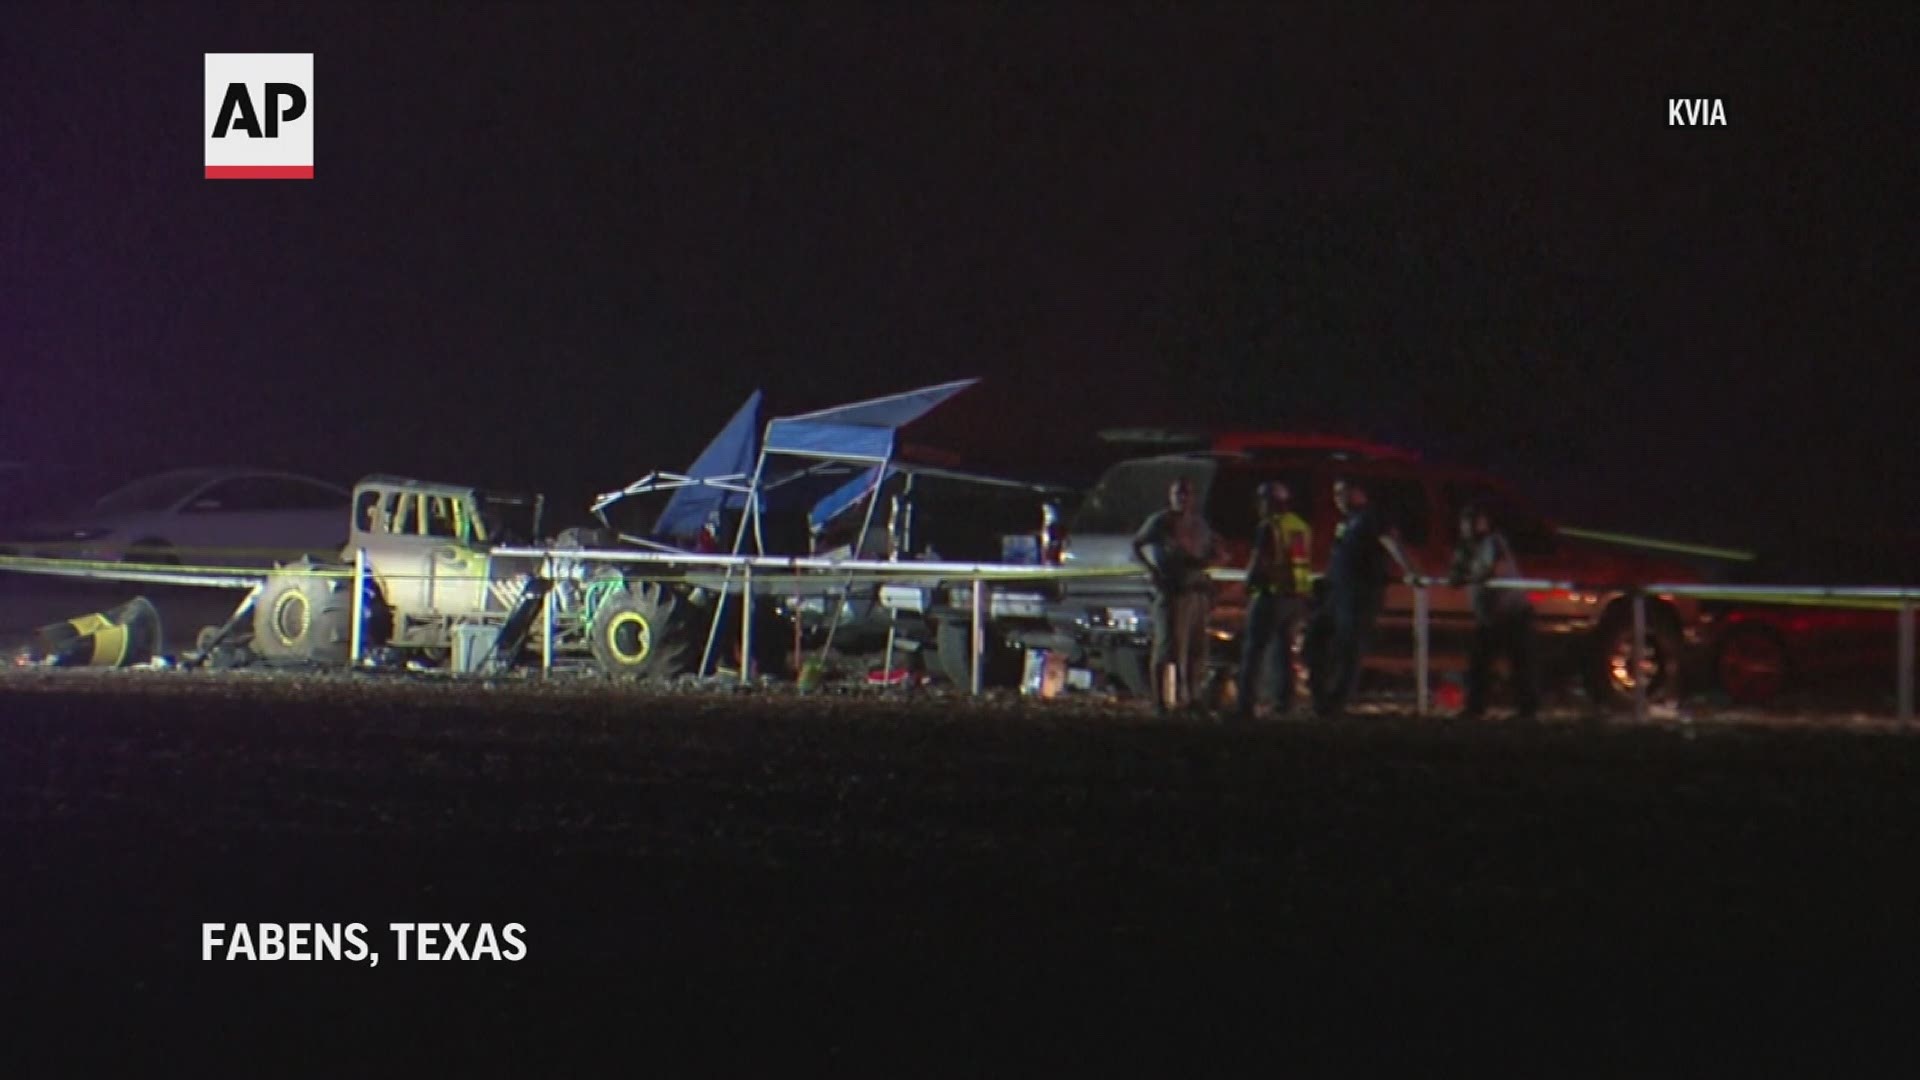 The El Paso County Sheriff’s Department says the crash happened Sunday night at a racetrack in Fabens, about 40 miles southeast of El Paso, Texas.